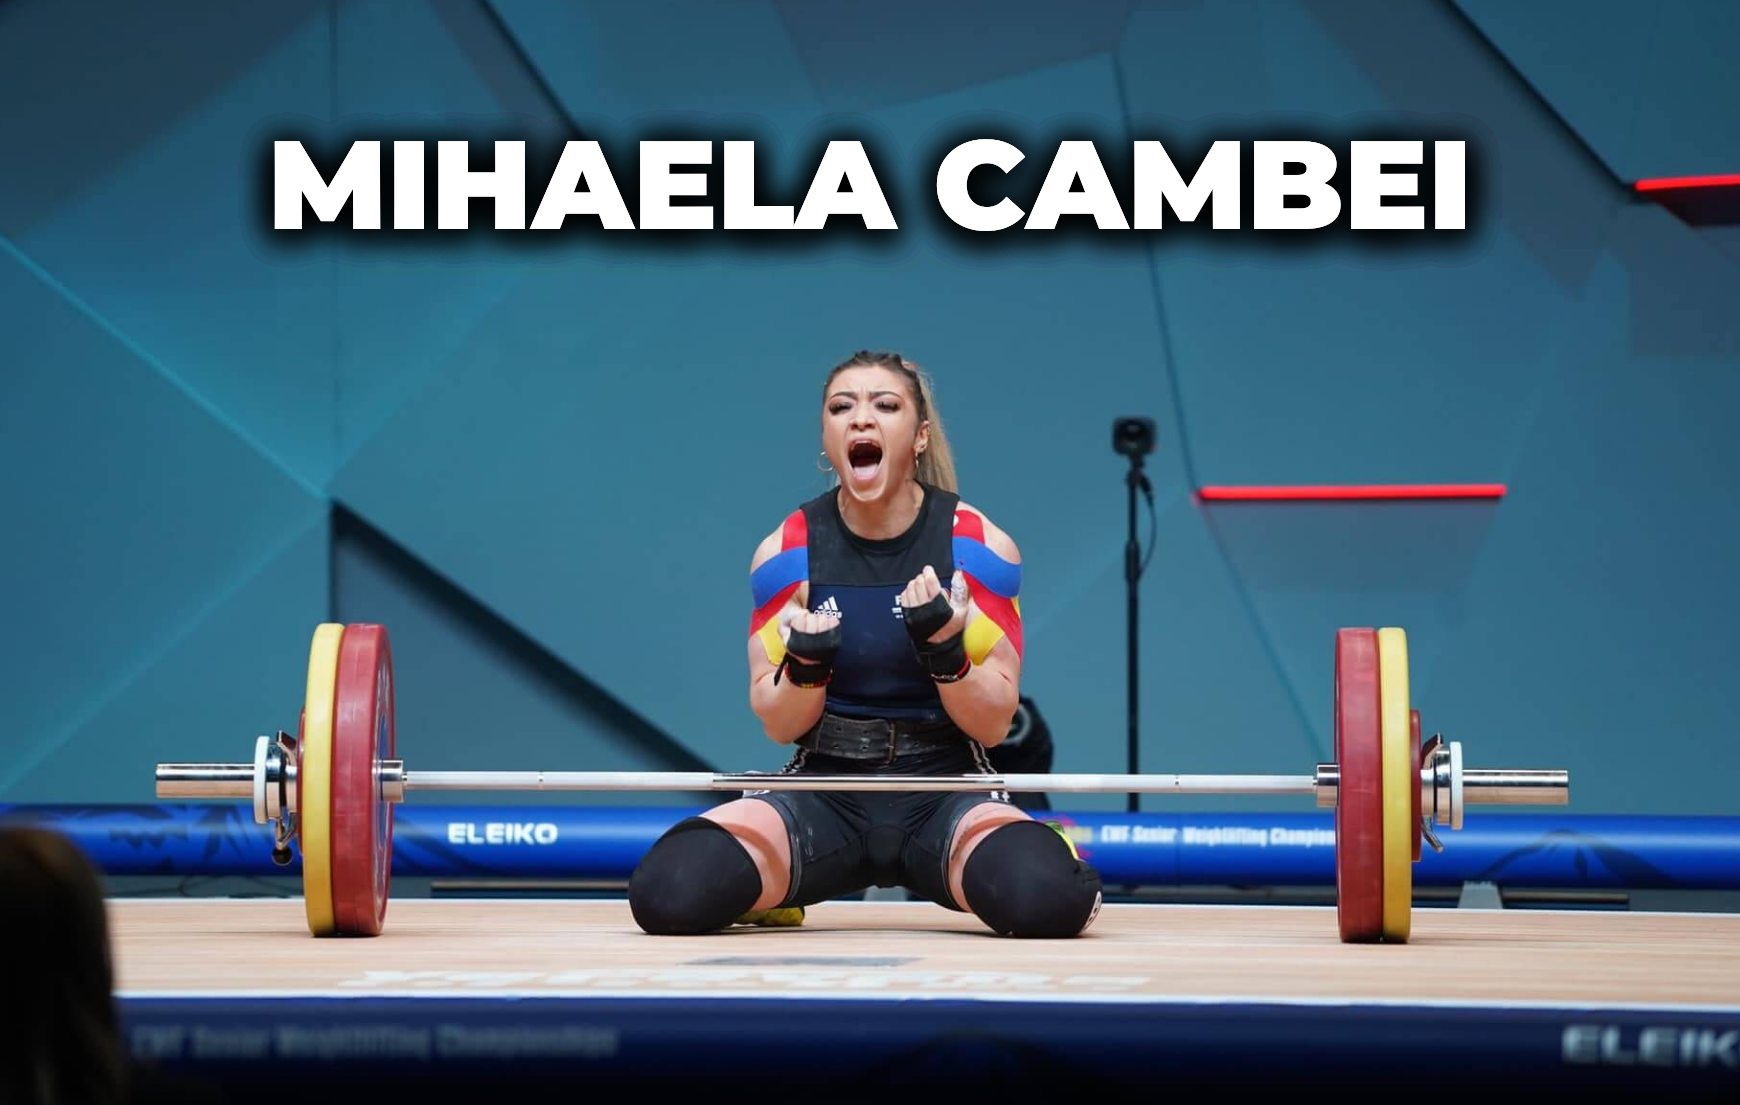 The Rise of Mihaela Cambei: A Look at Her Career and 2023 World Weightlifting Championships Prospects